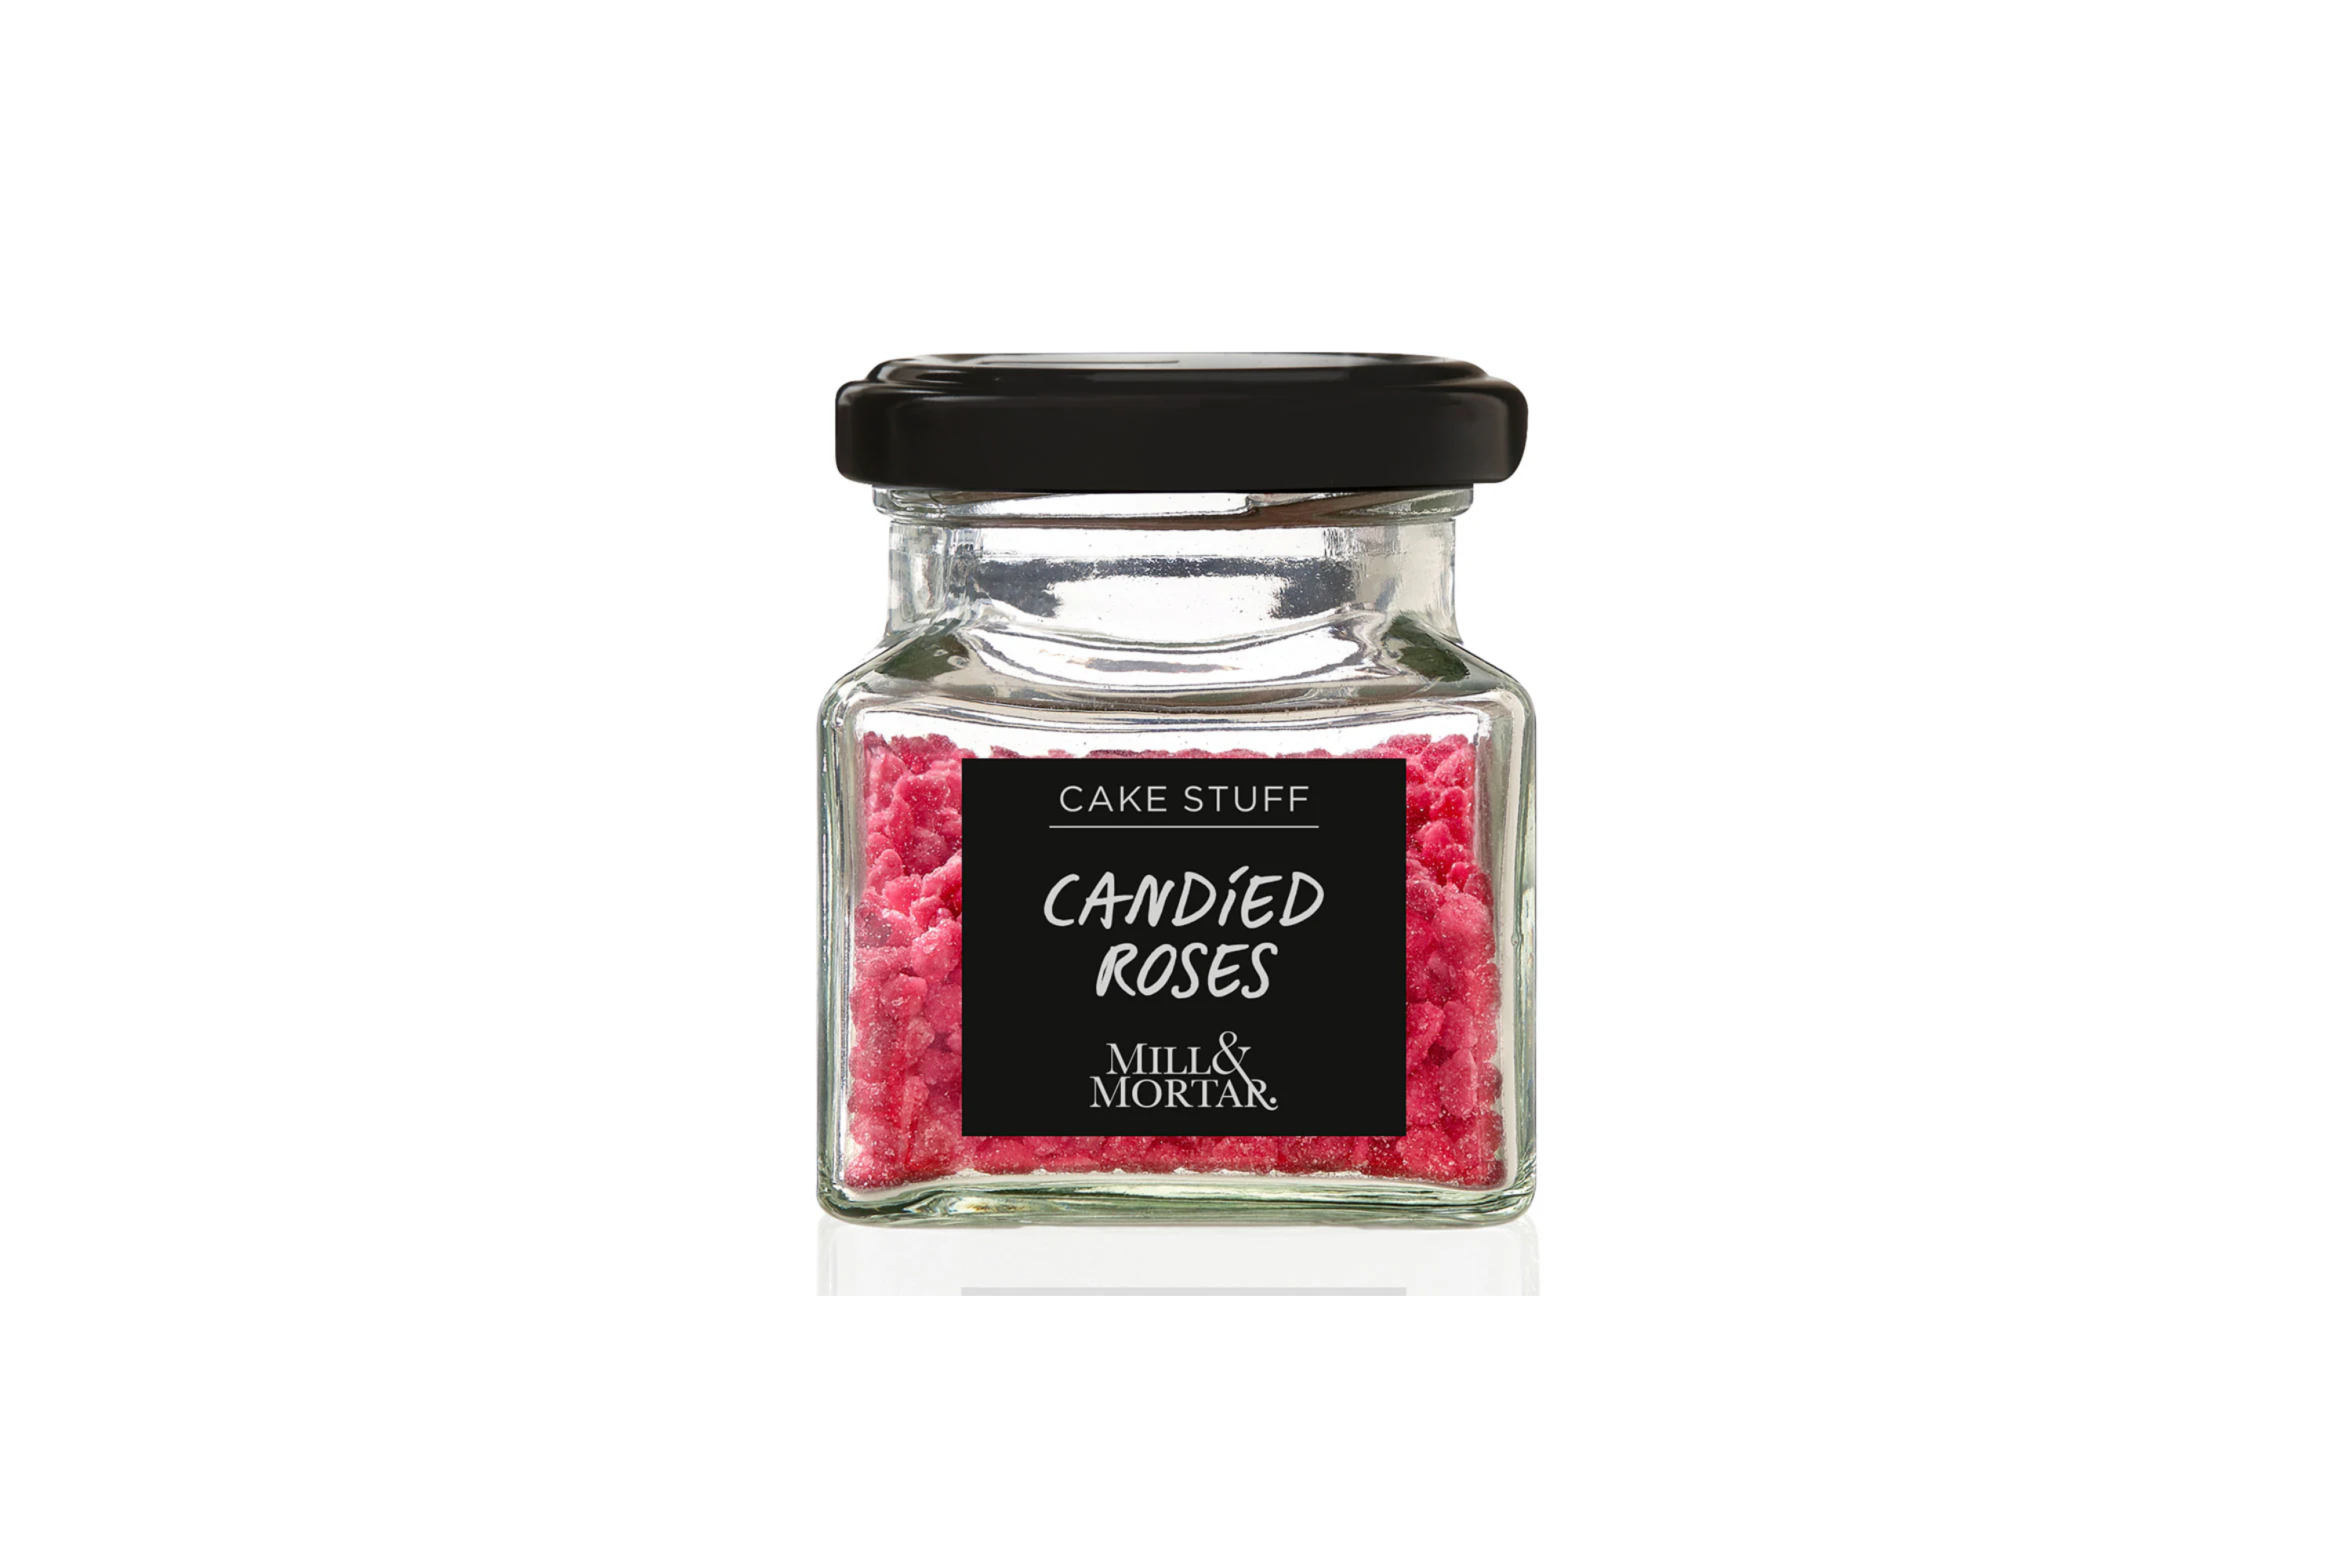 Candied rose